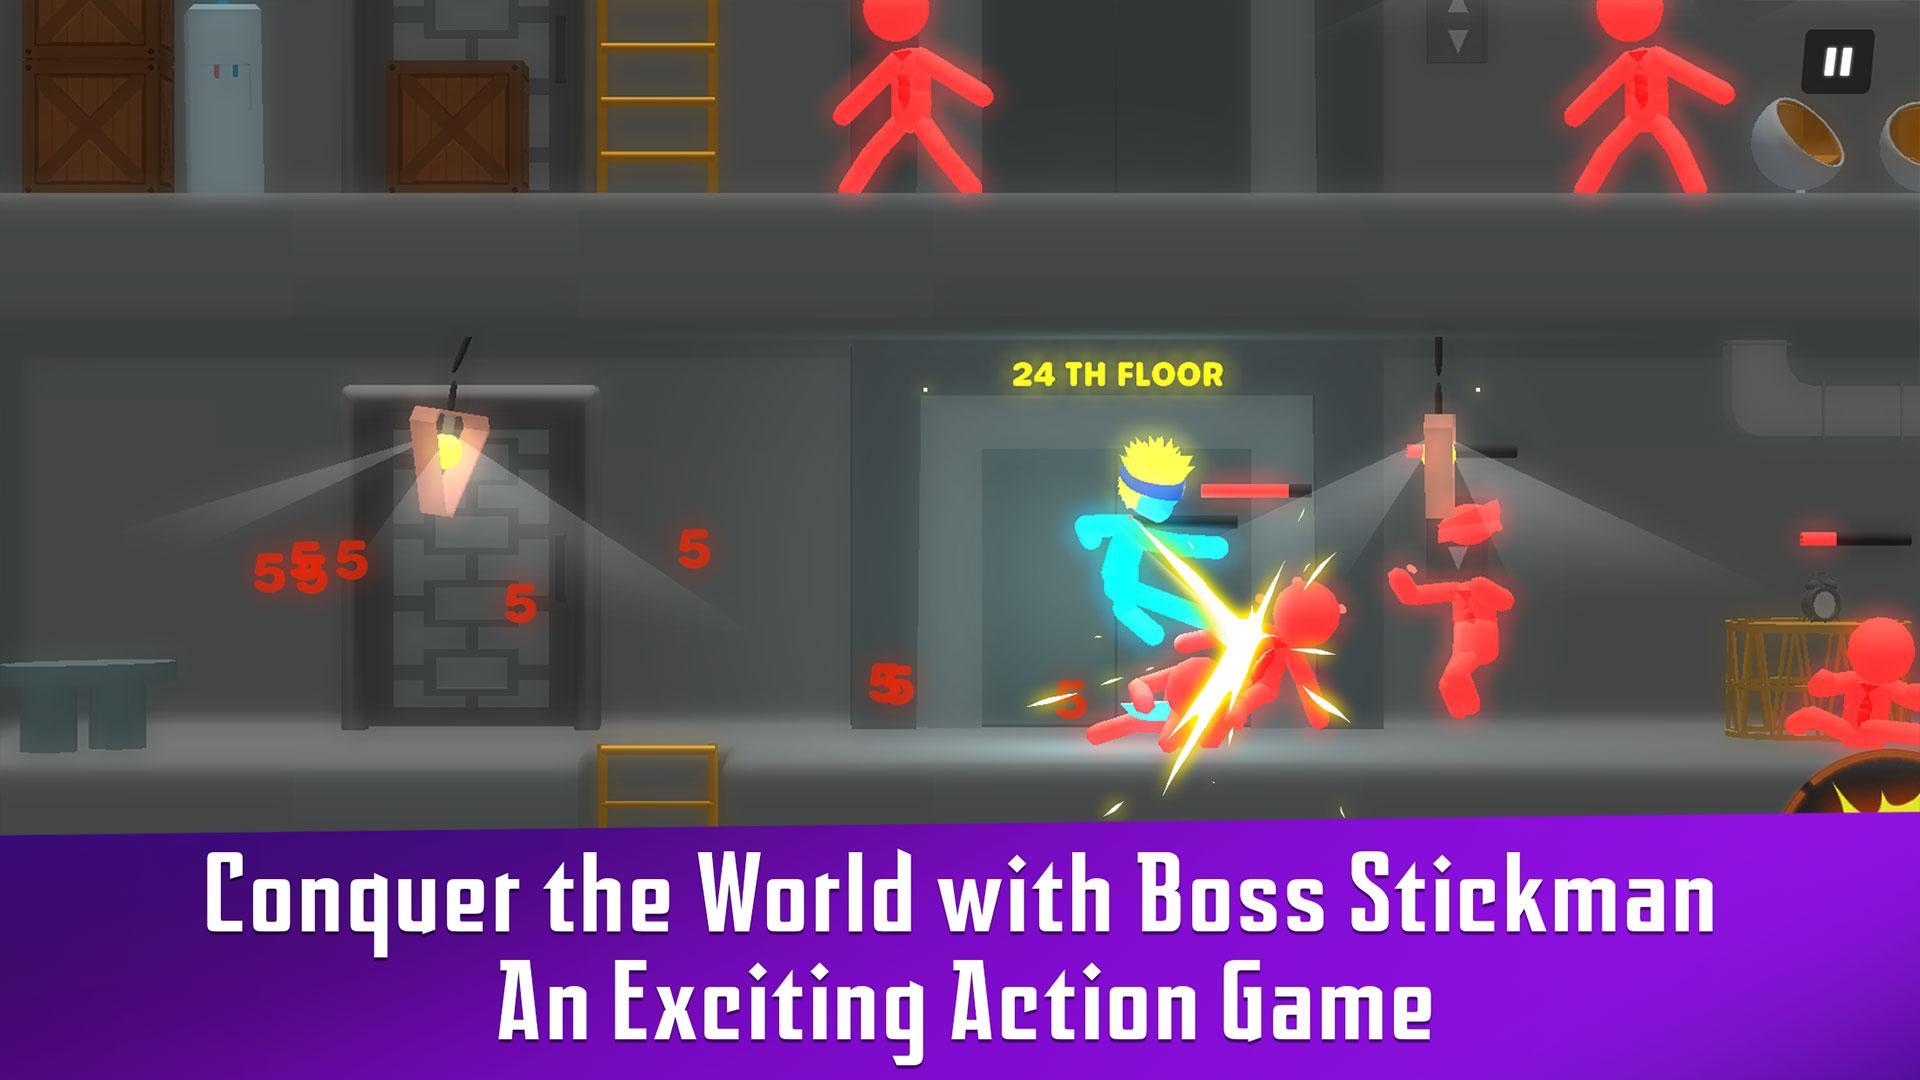 Play Boss Stickman Online for Free on PC & Mobile